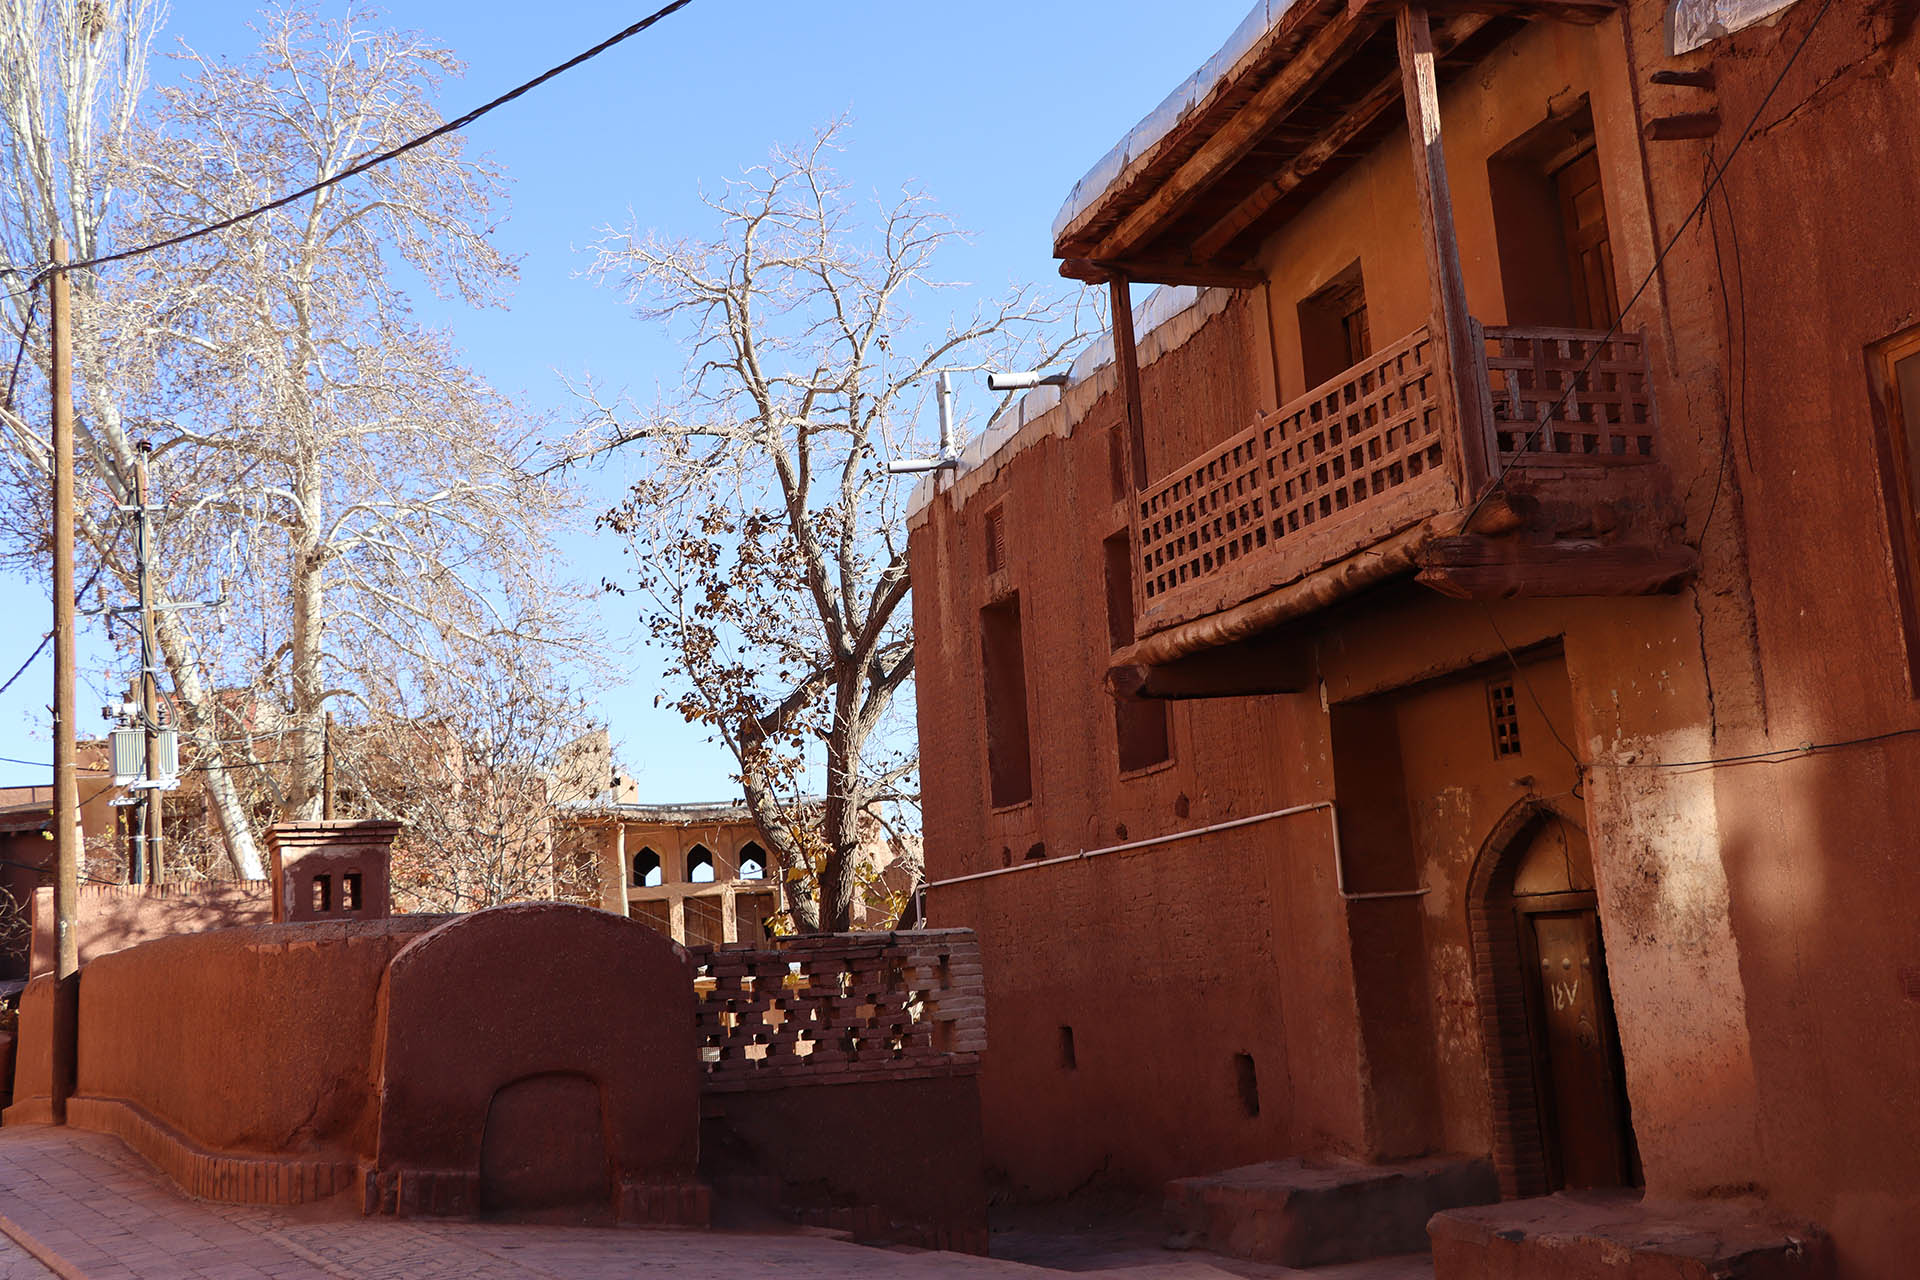 Abyaneh: Beautiful village in iran with colorful people